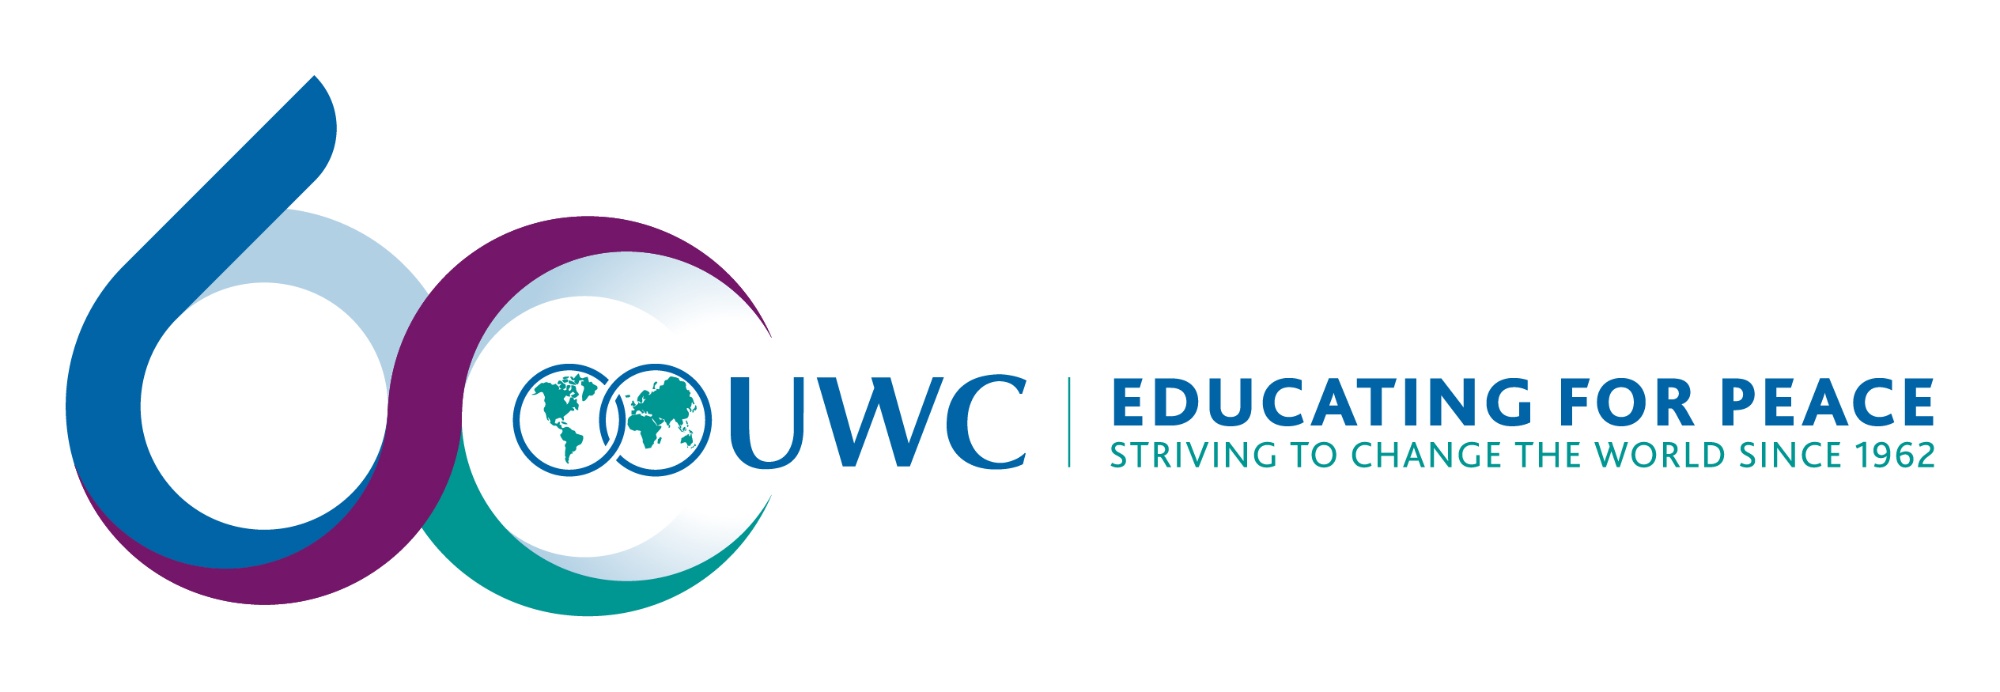 UWC 60th Anniversary - Educating for peace, striving to change the world since 1962